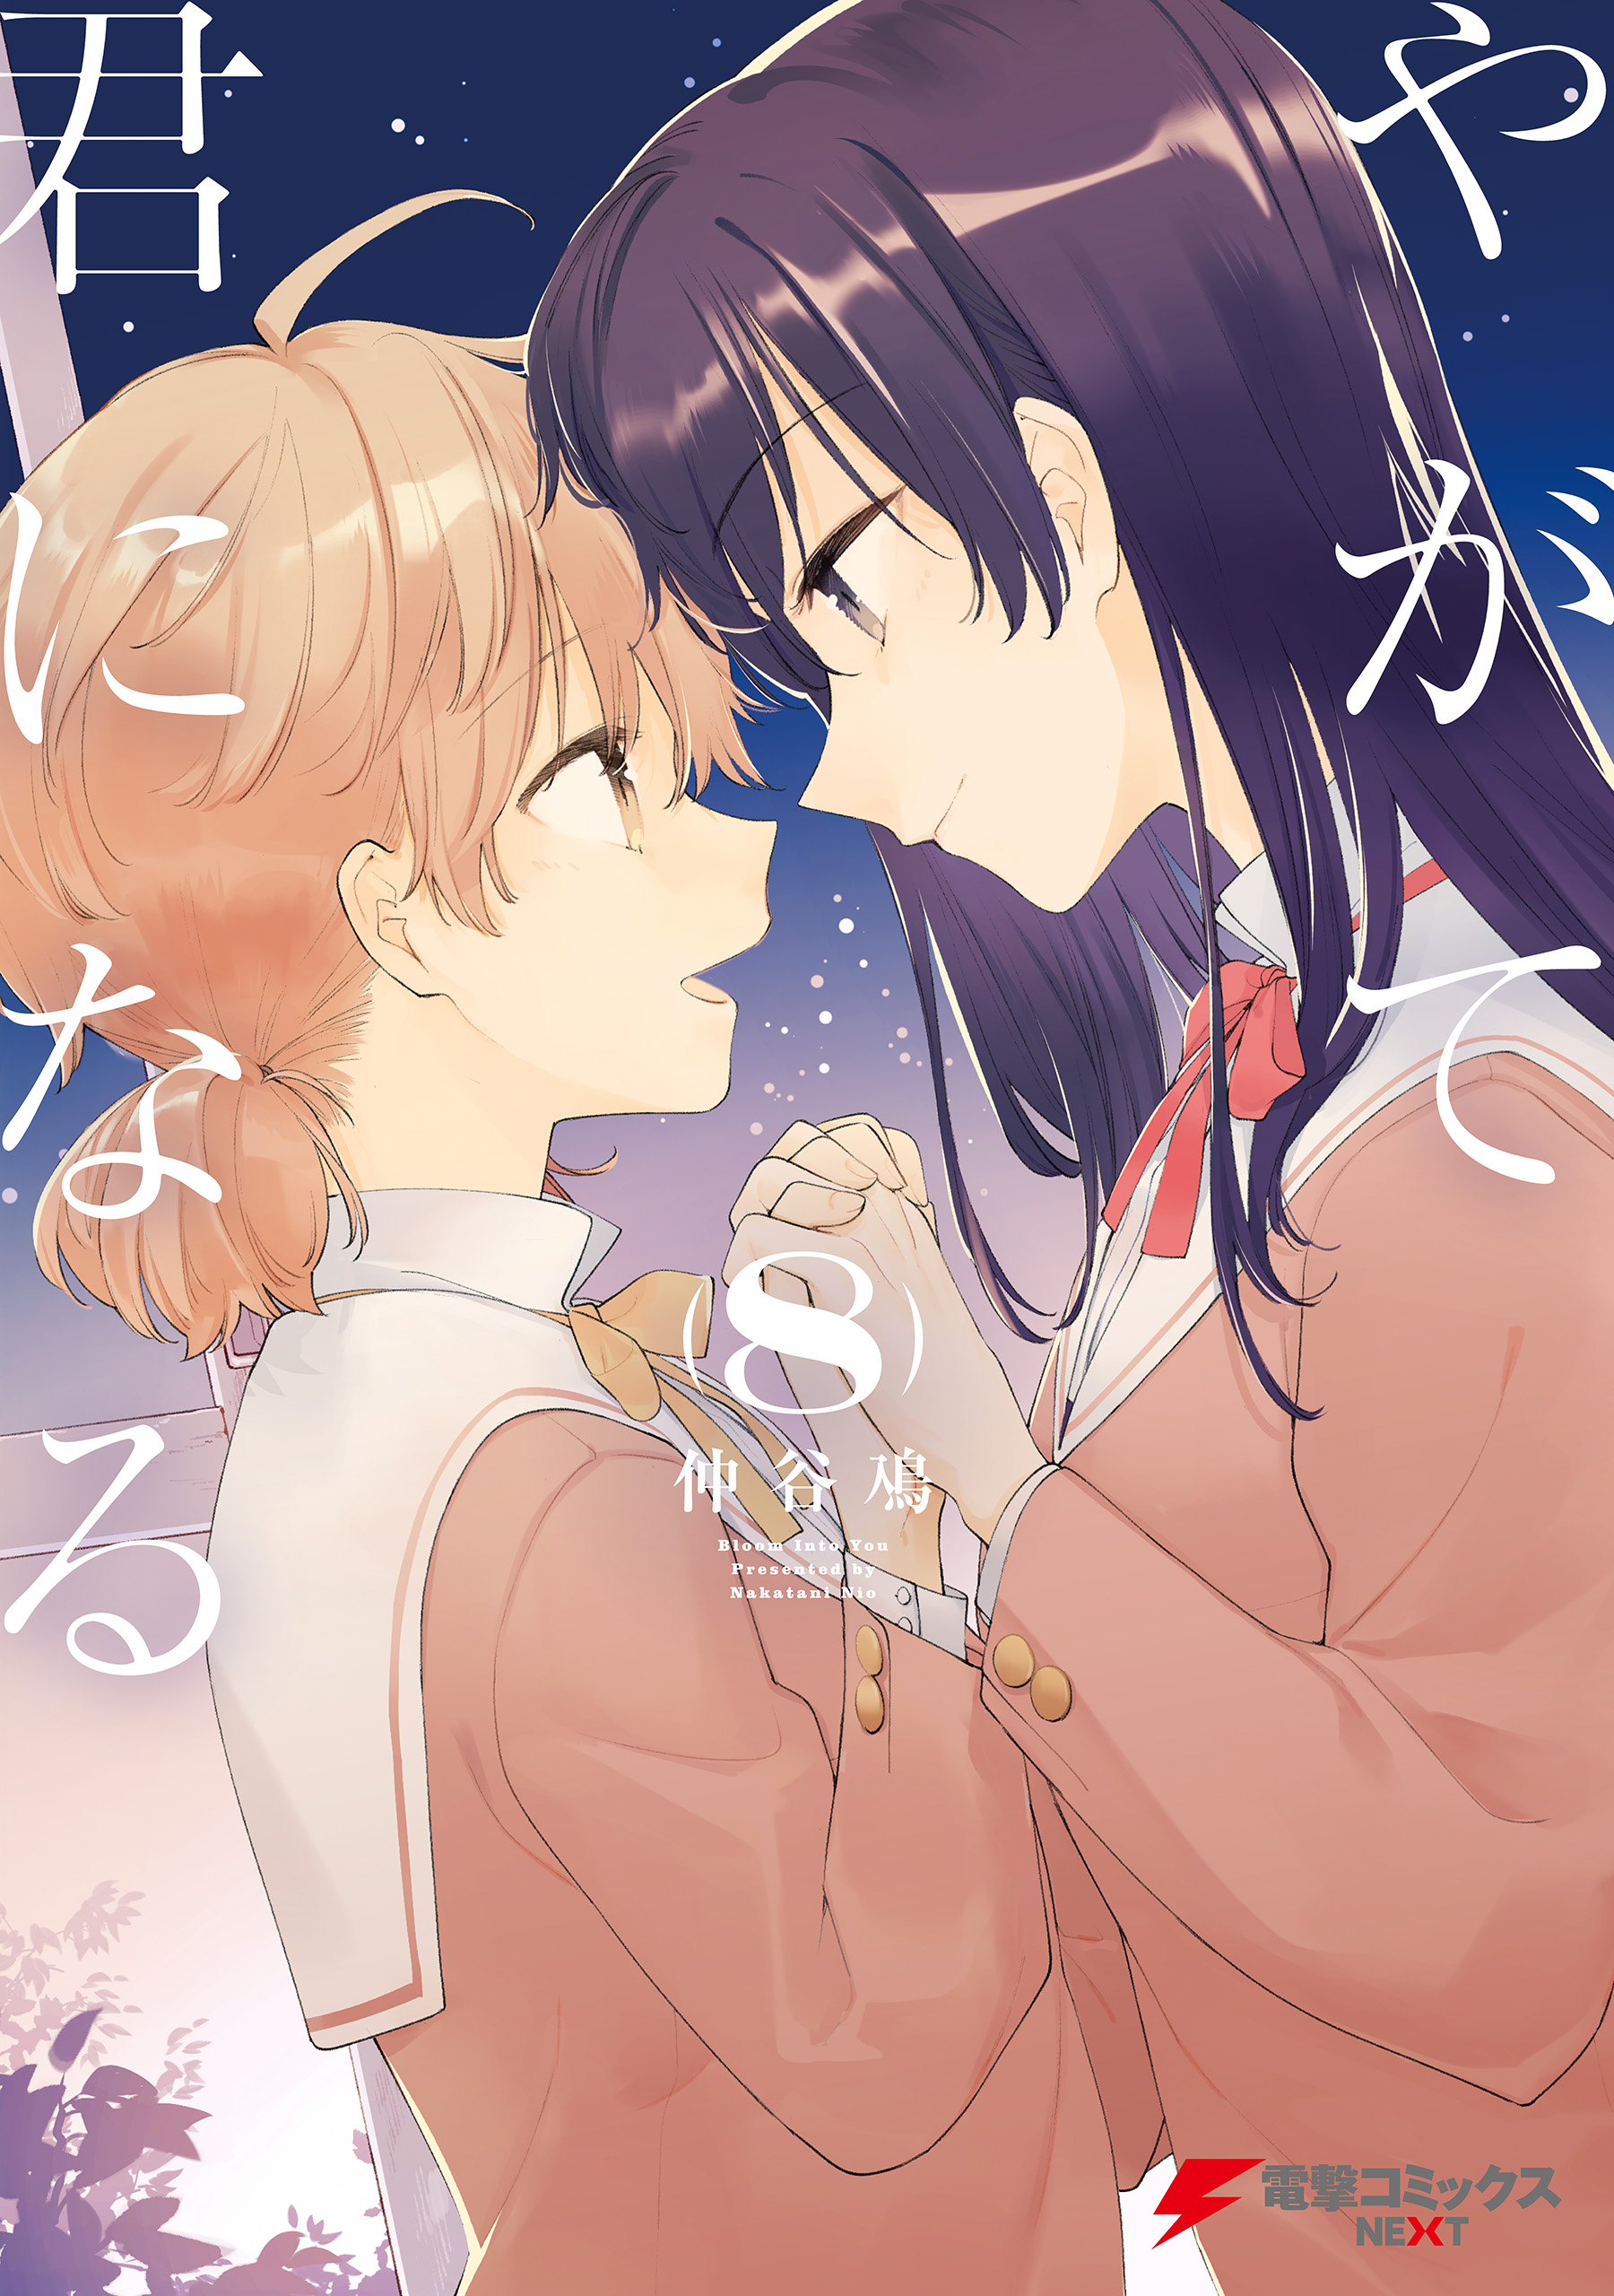 Bloom Into You Chapter 1 Bloom Into You - MangaDex